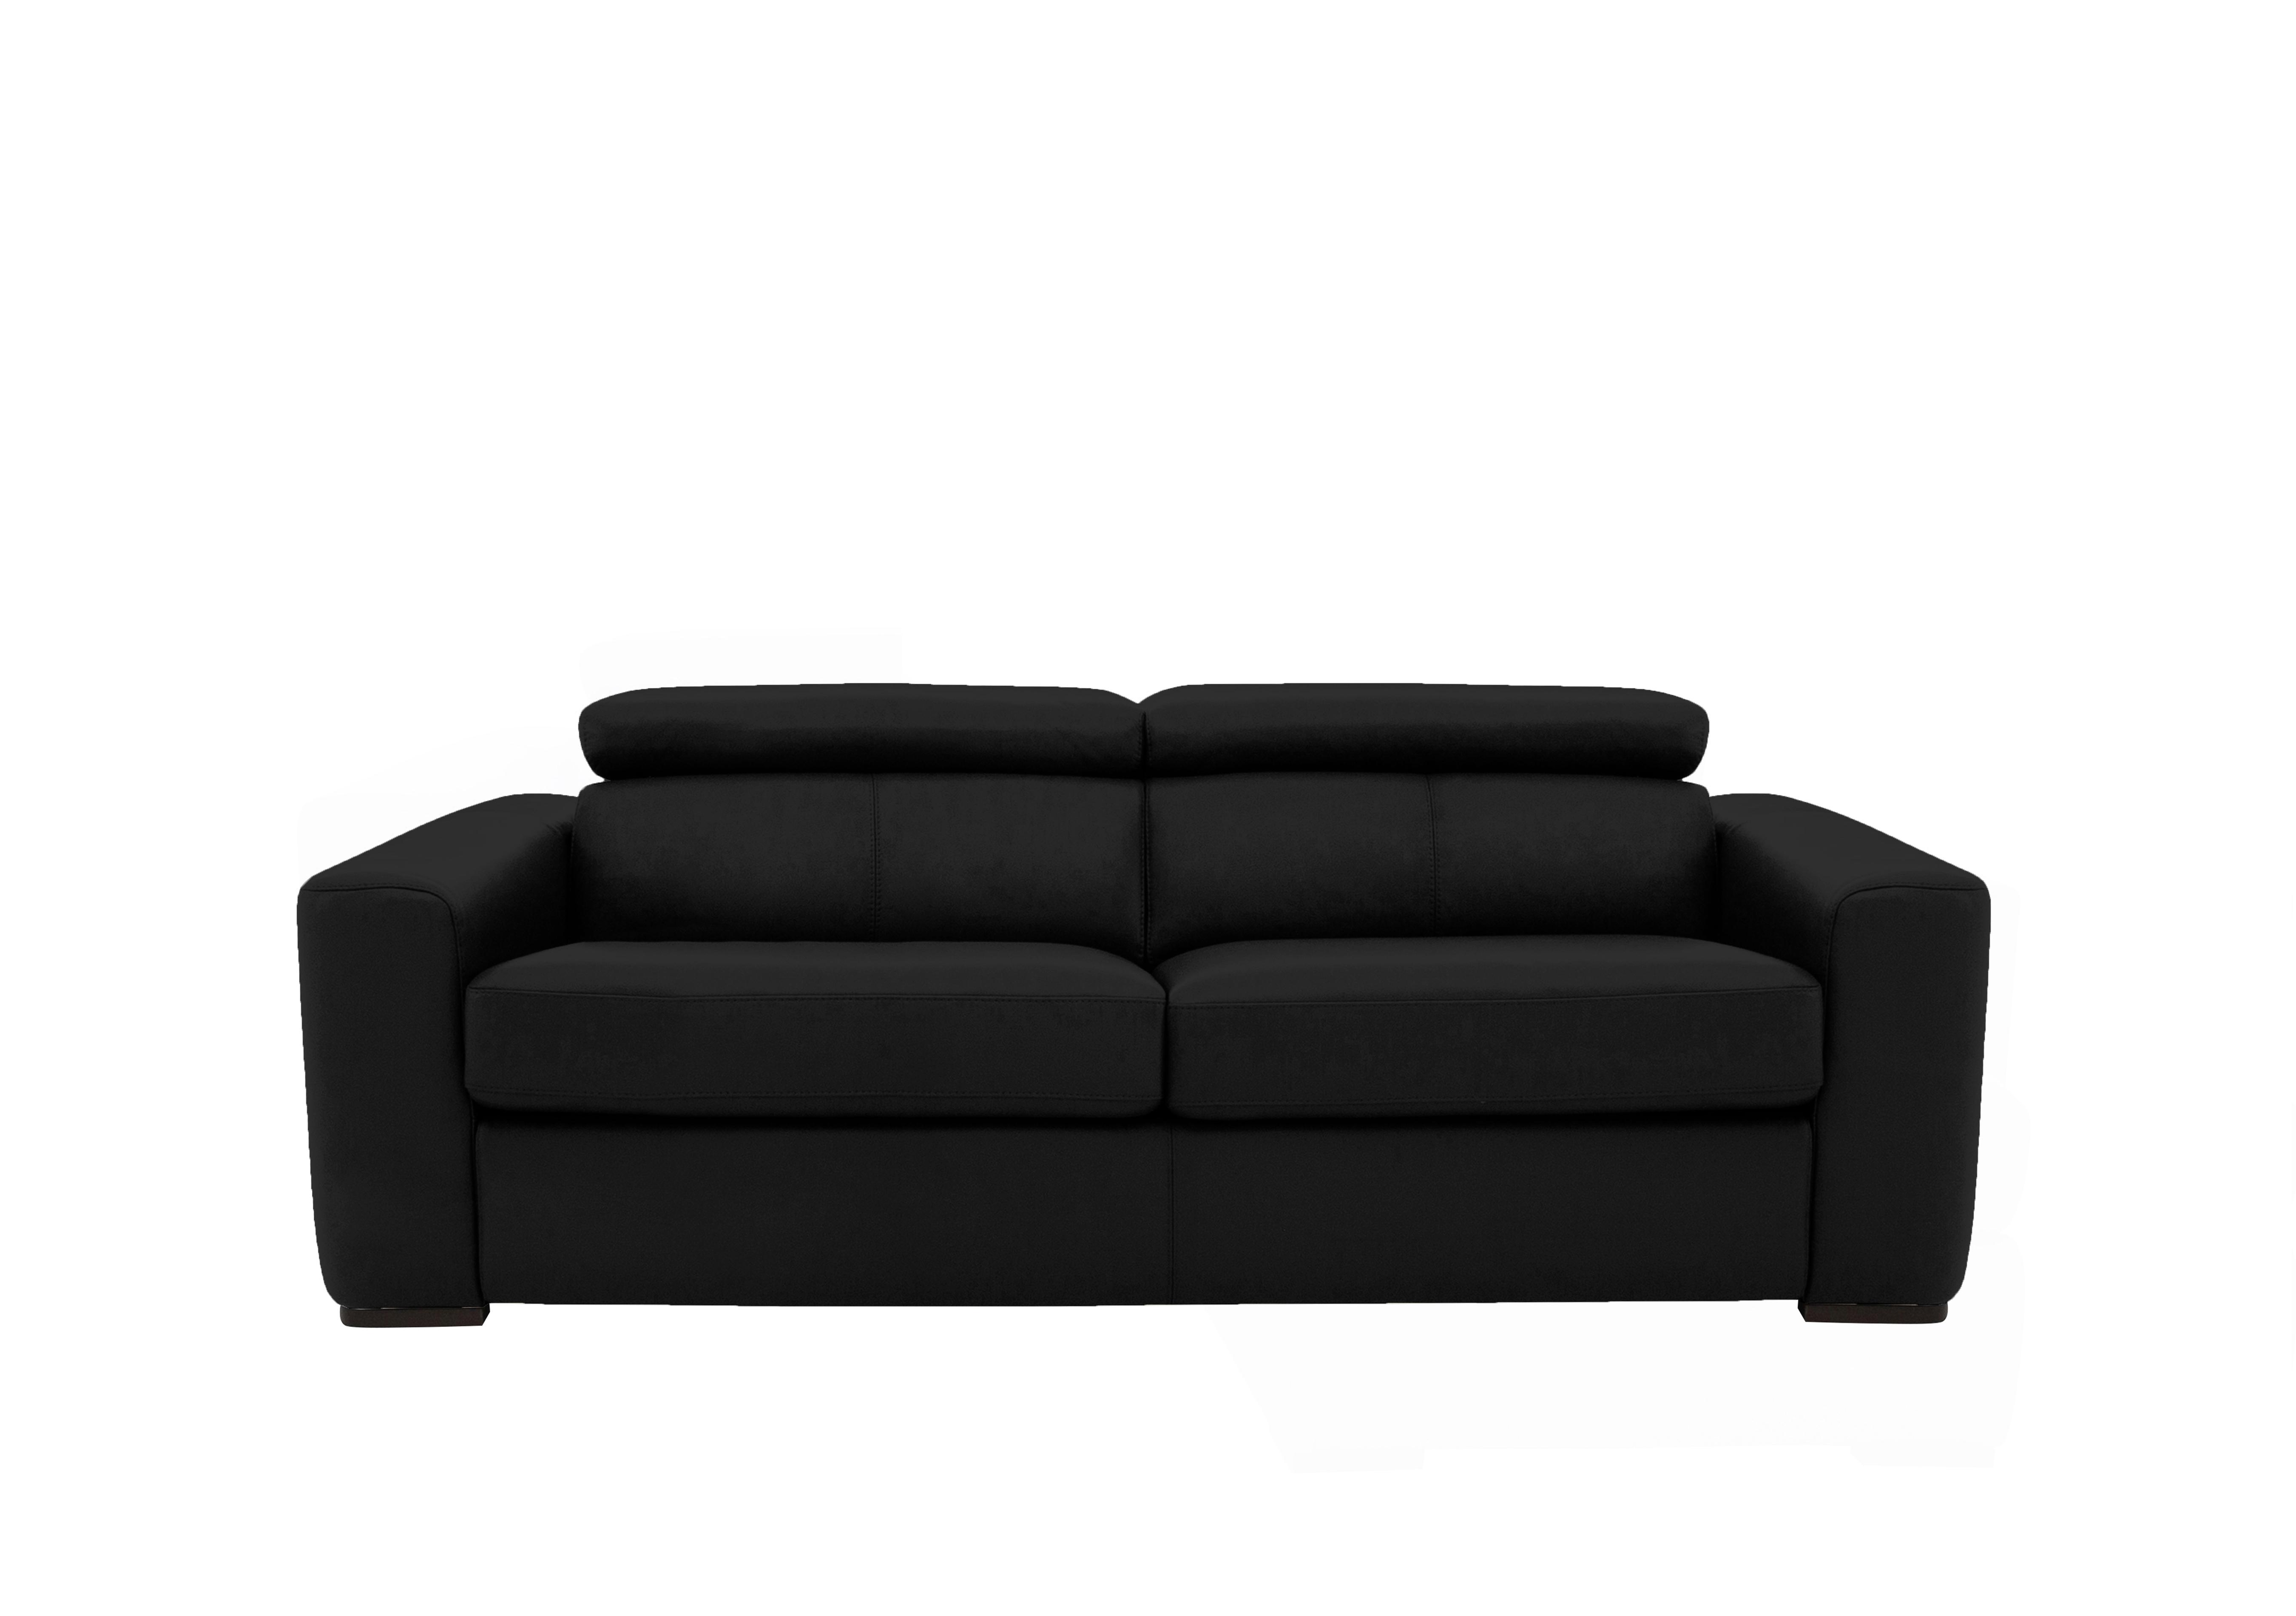 Infinity 3 Seater Leather Sofa Bed in Bv-3500 Classic Black on Furniture Village